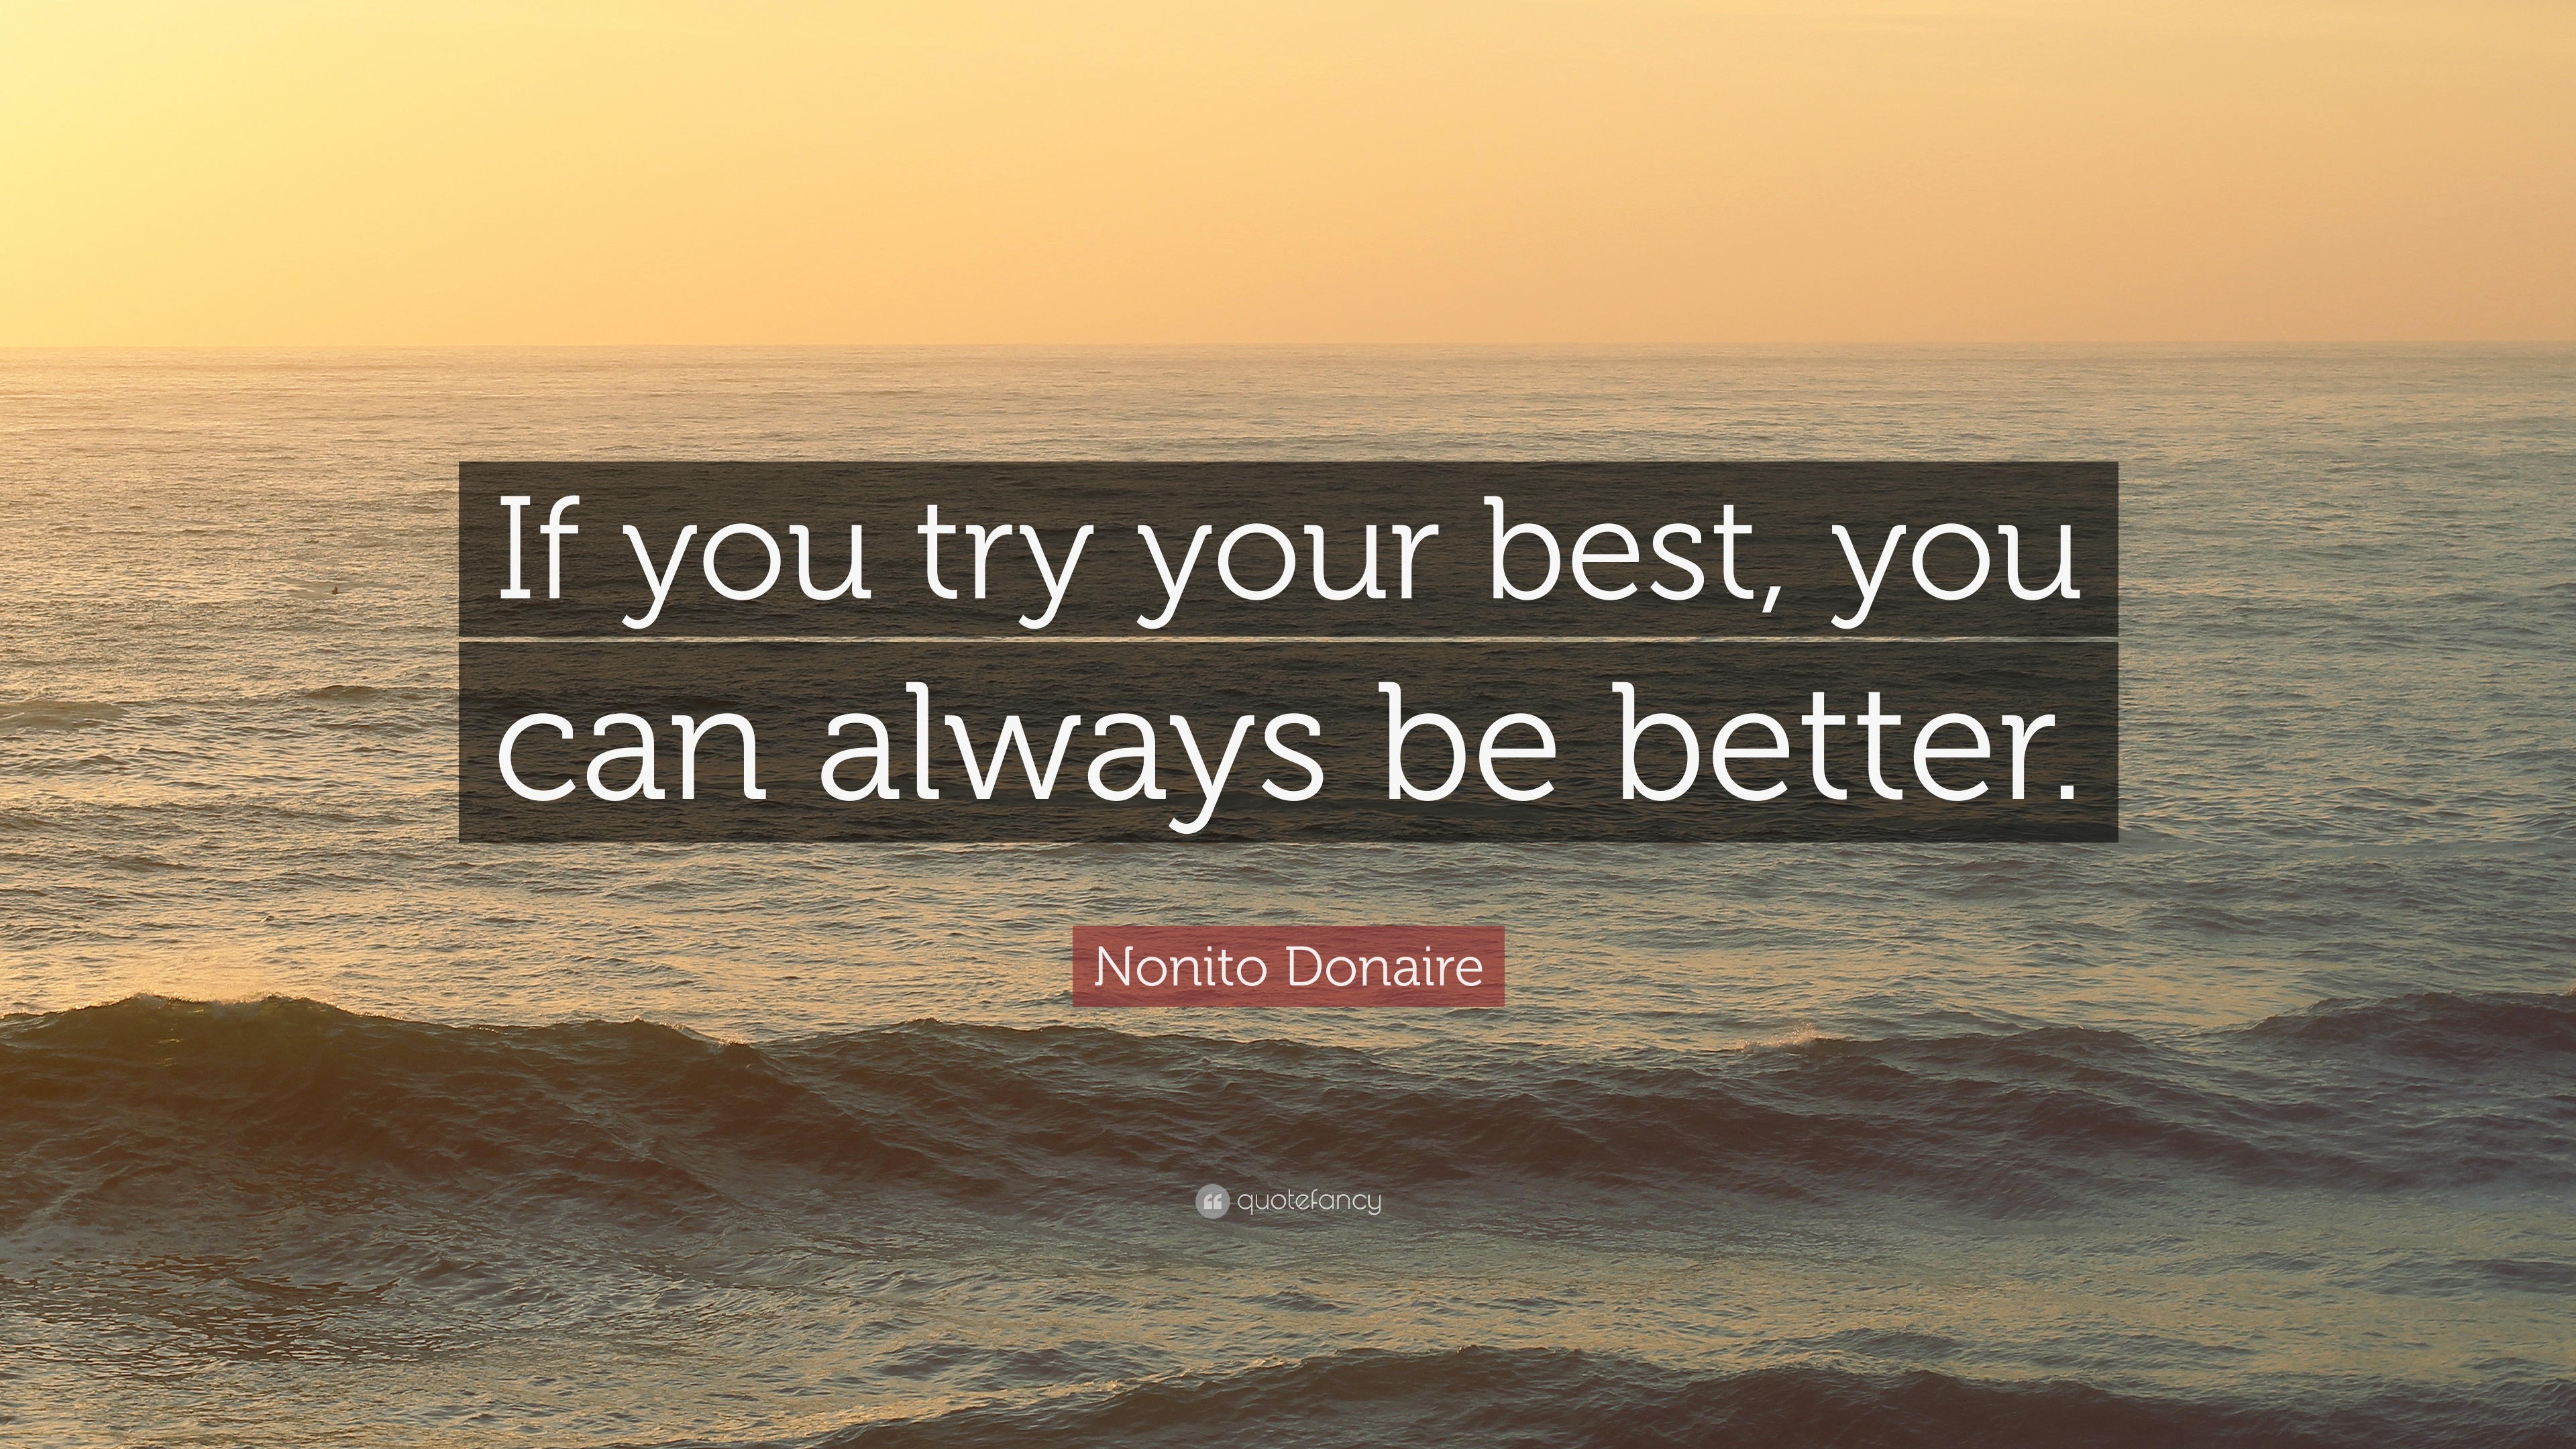 Nonito Donaire Quote  If you try  your  best  you can 